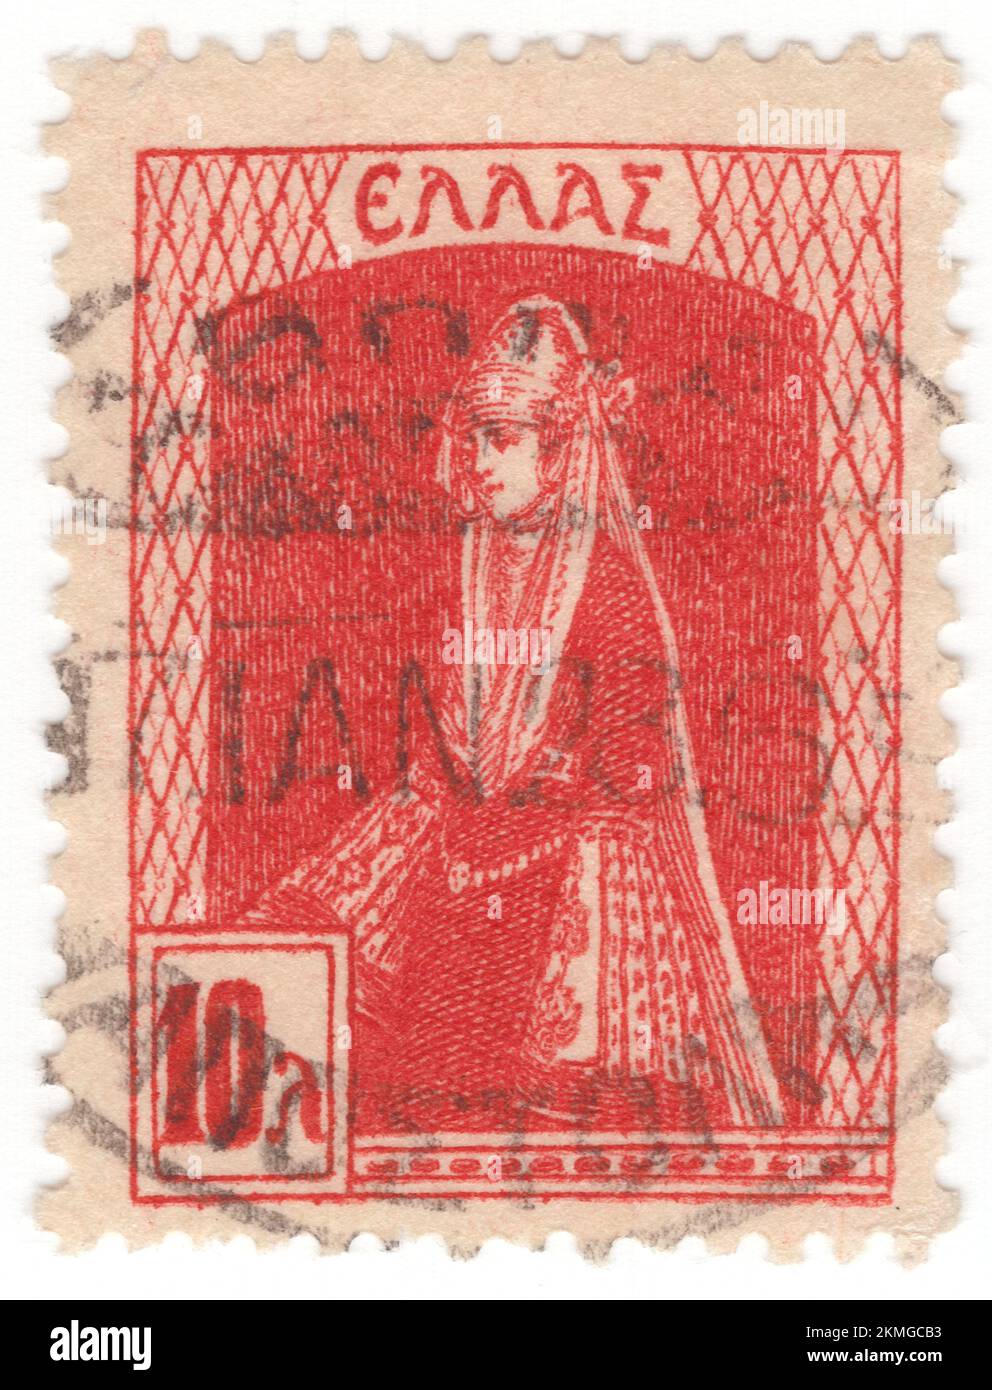 GREECE - 1927 April 1: An 10 lepta orange-red postage stamp depicting Dodecanese Costume. The Dodecanese are a group of 15 larger plus 150 smaller Greek islands in the southeastern Aegean Sea and Eastern Mediterranean, off the coast of Turkey's Anatolia, of which 26 are inhabited. This island group generally defines the eastern limit of the Sea of Crete. They belong to the wider Southern Sporades island group. Rhodes has been the area's dominant island since antiquity. Of the others, Kos and Patmos are historically the more important Stock Photo